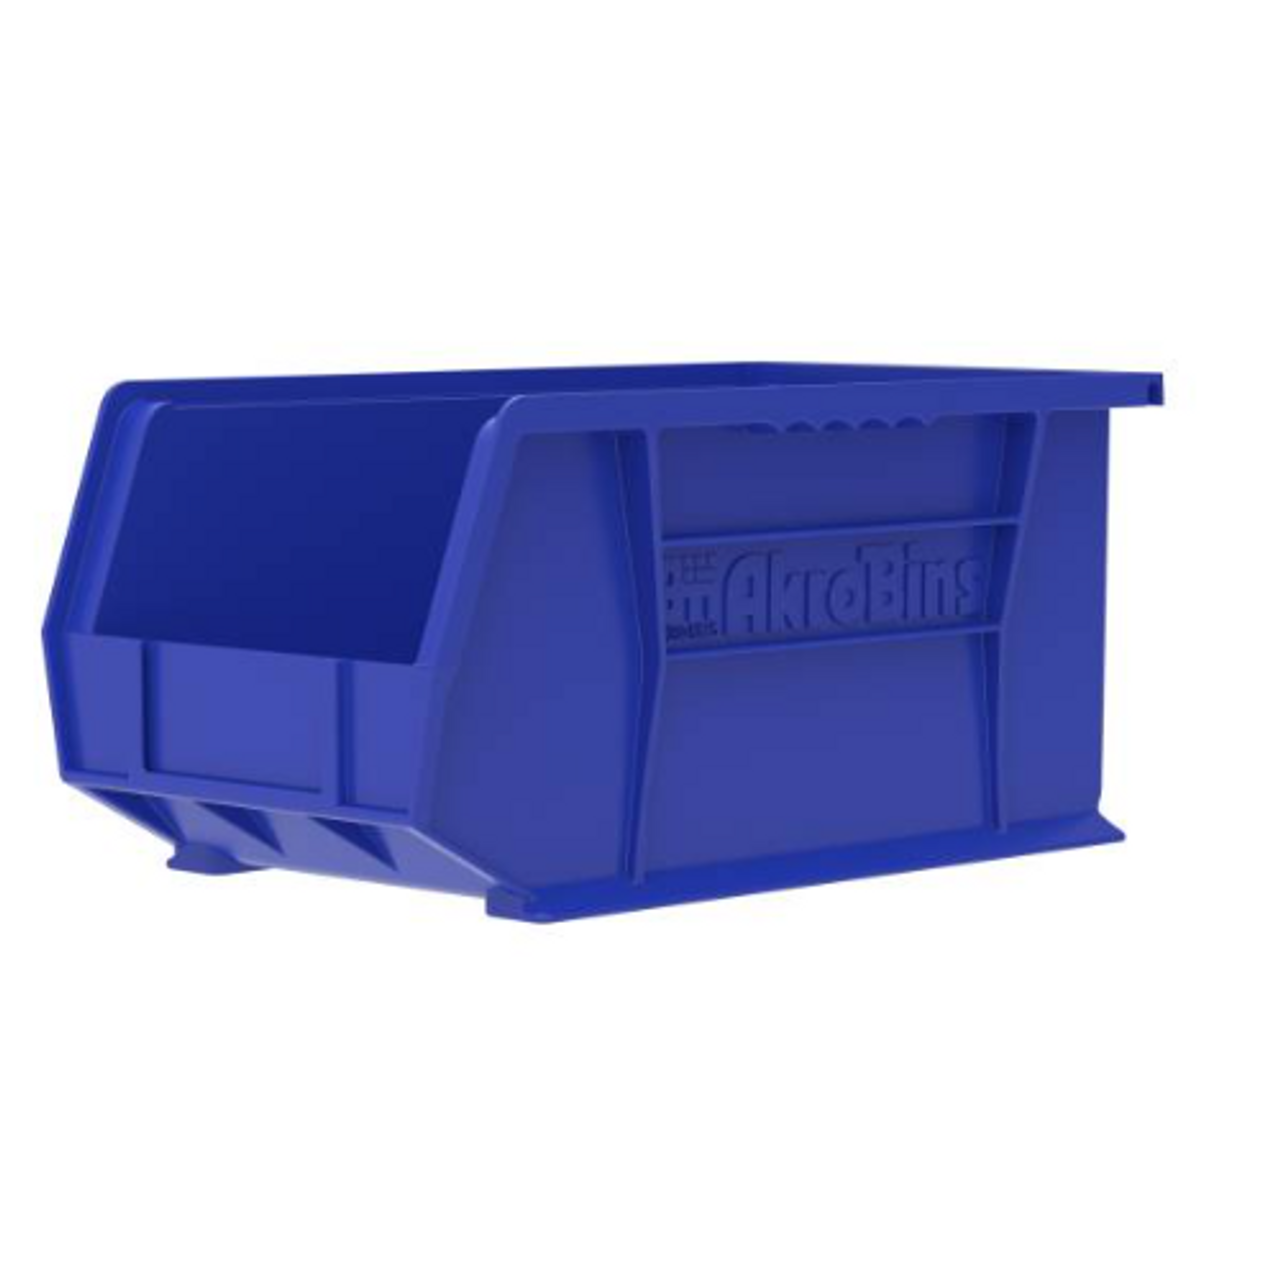 30240 14-3/4" x 81/4" x 7" Blue Hanging and Stacking Bin